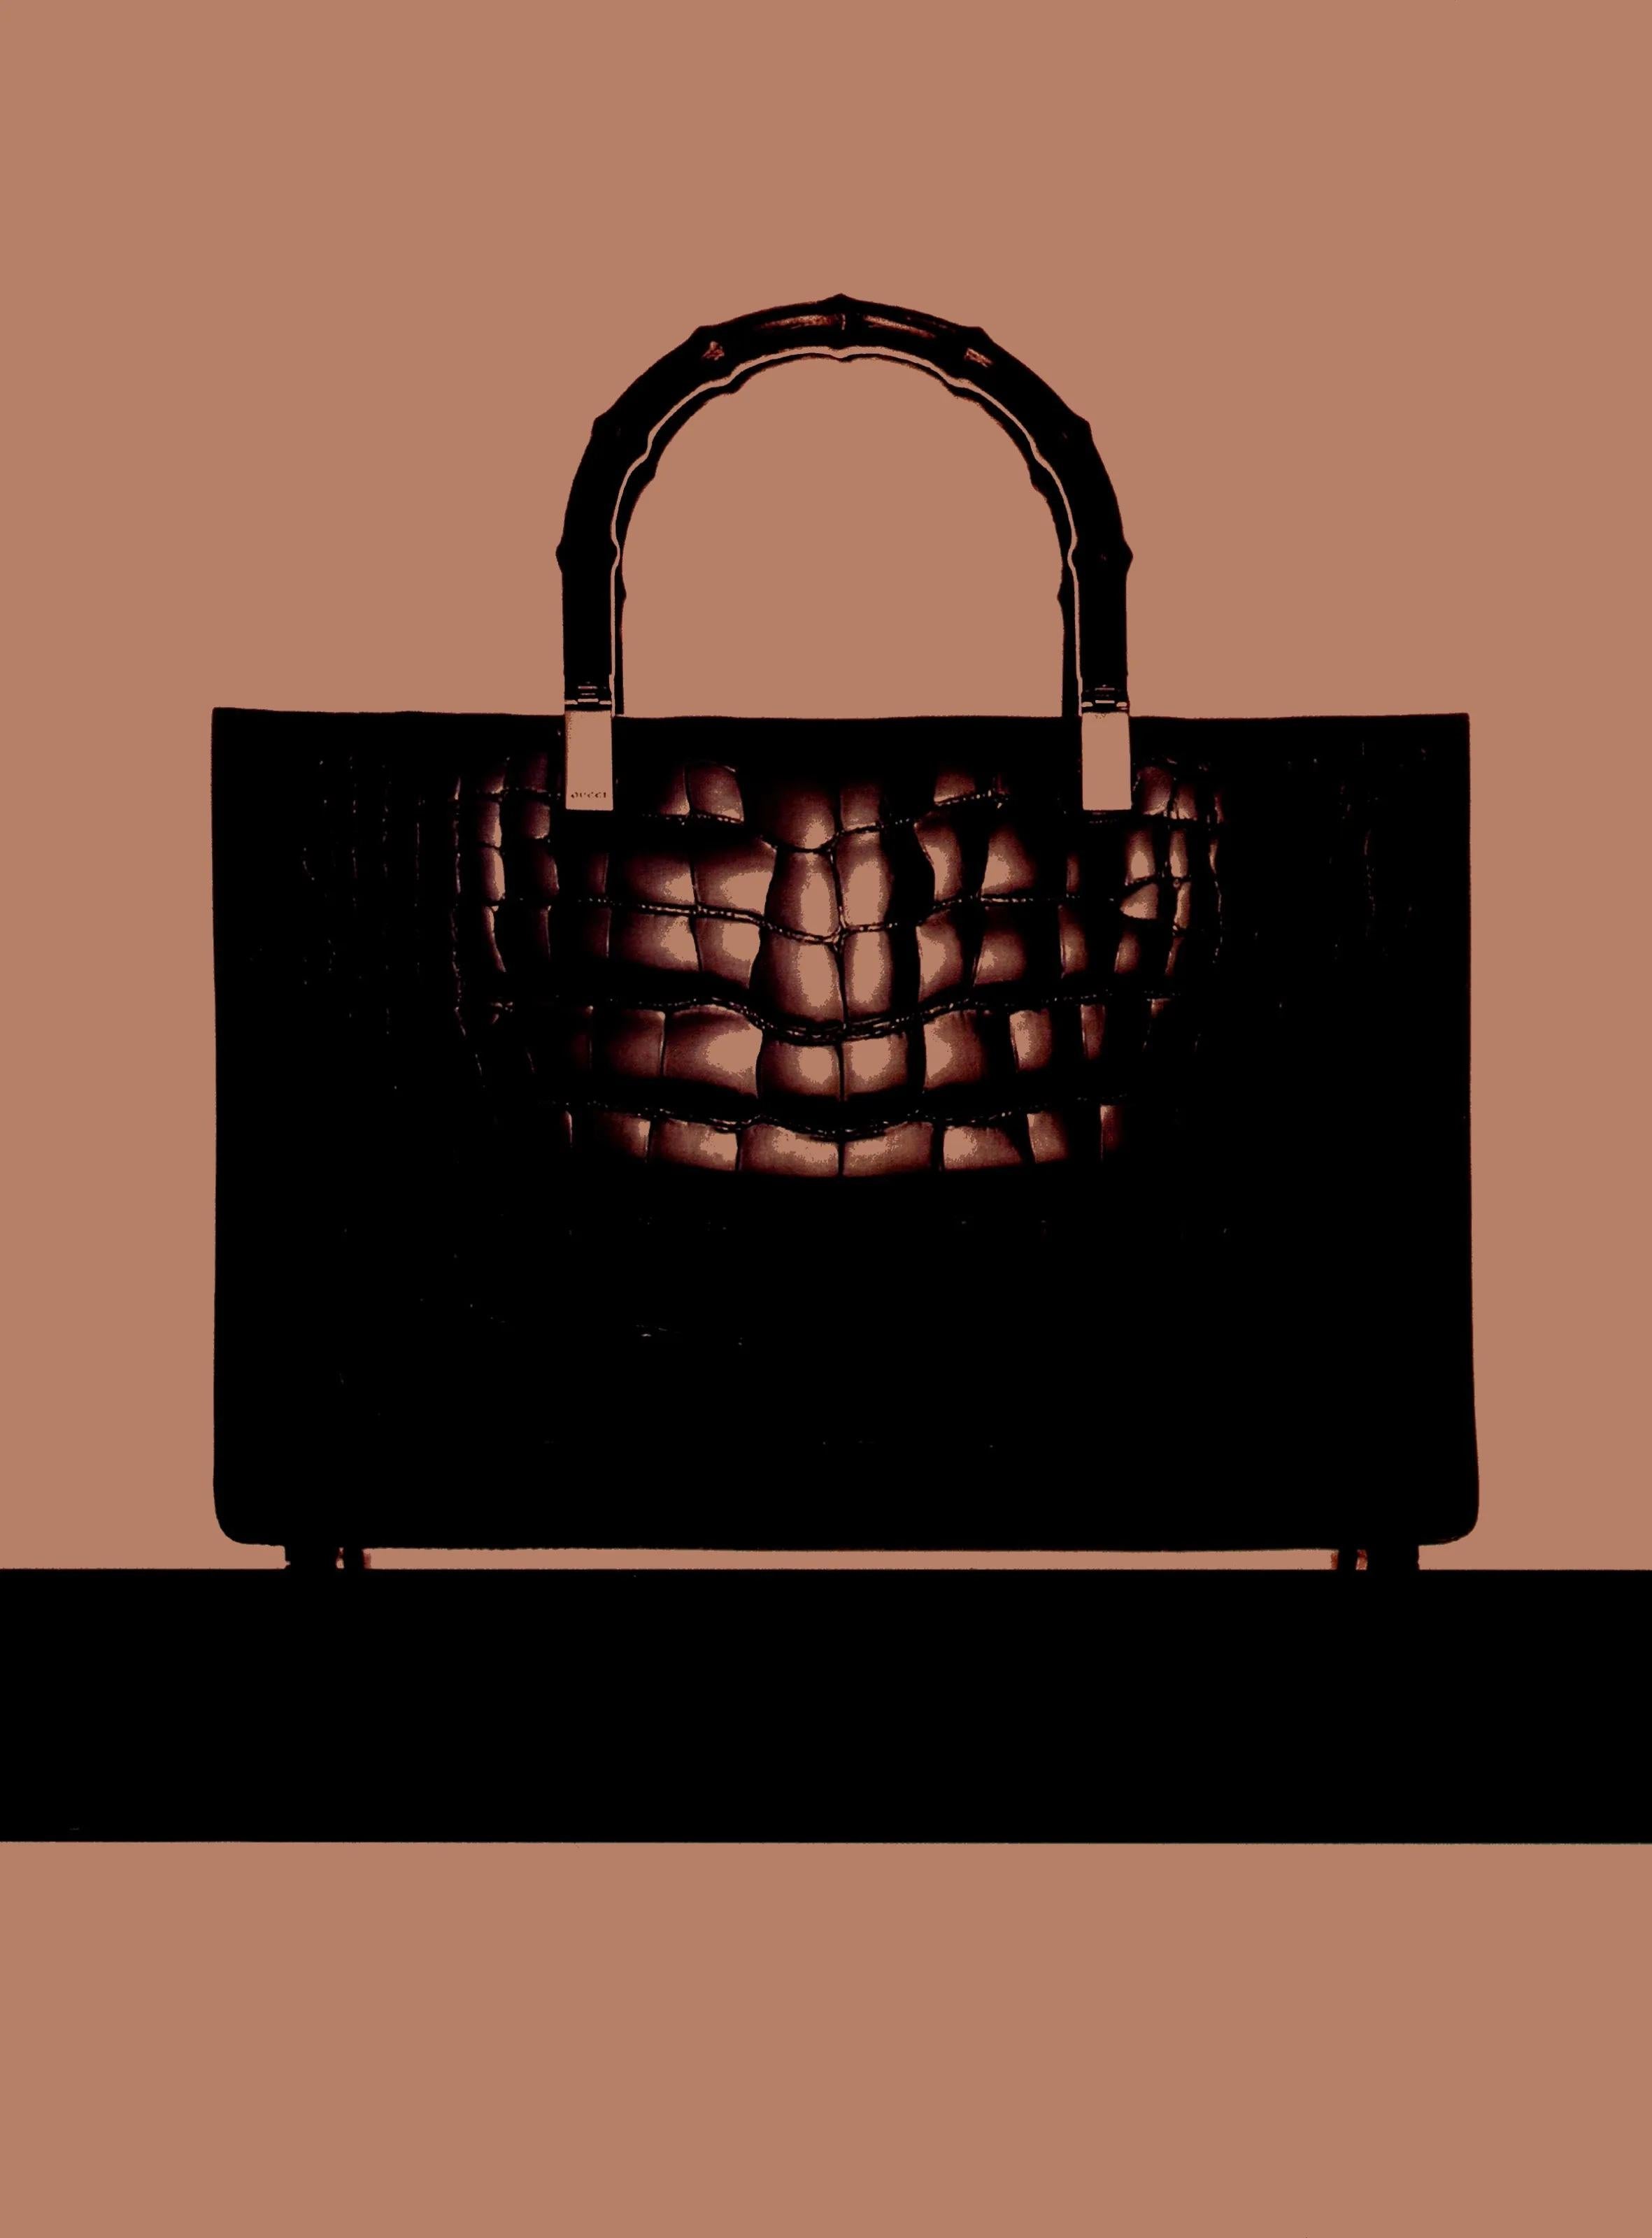 From the Fall/Winter 1998 collection, this Gucci by Tom Ford crocodile bamboo bag is a must-have for any Gucci-lover. Constructed entirely of glossy black crocodile, this bag was highlighted in the season's ad campaign, captured by Steven Klein.